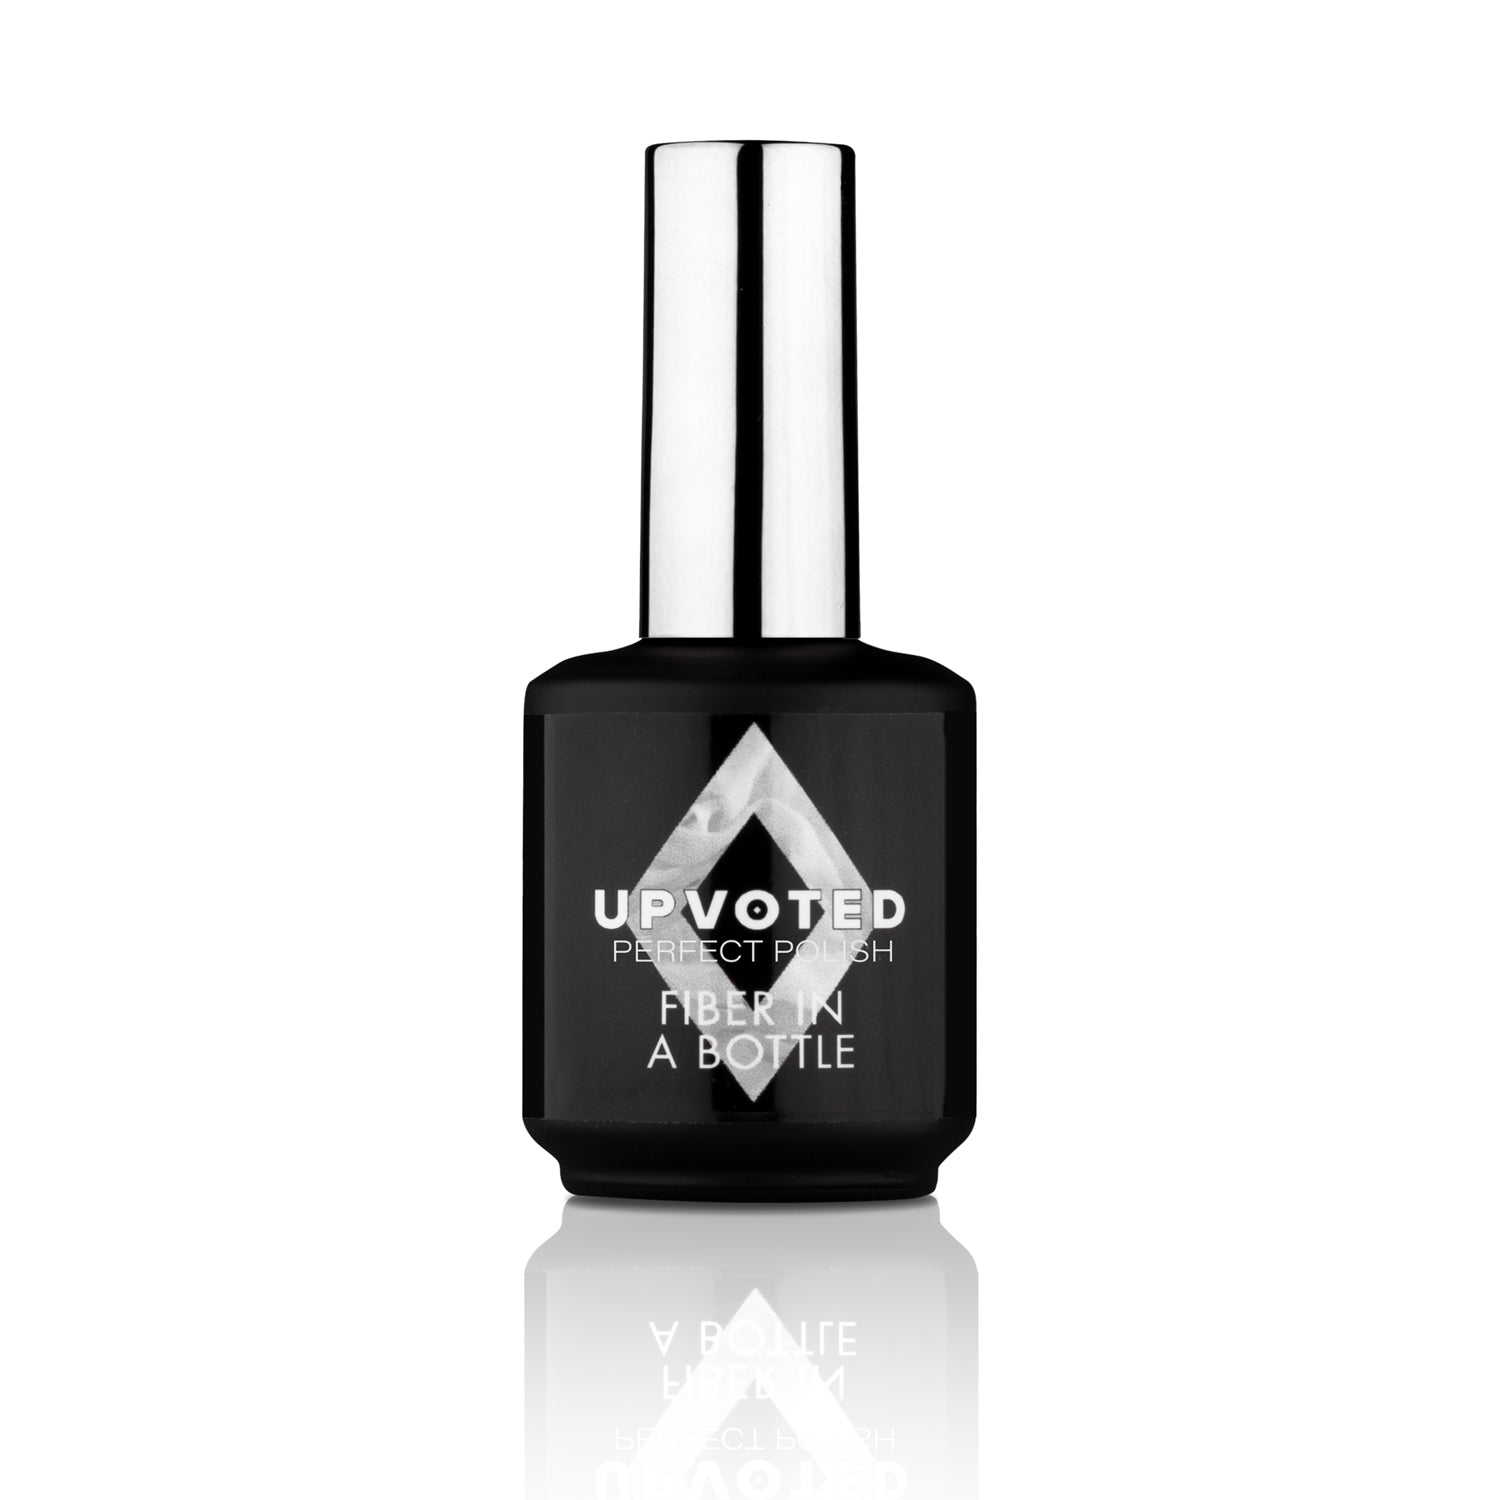 Nail Perfect Upvoted Fiber in a Bottle Cotton White